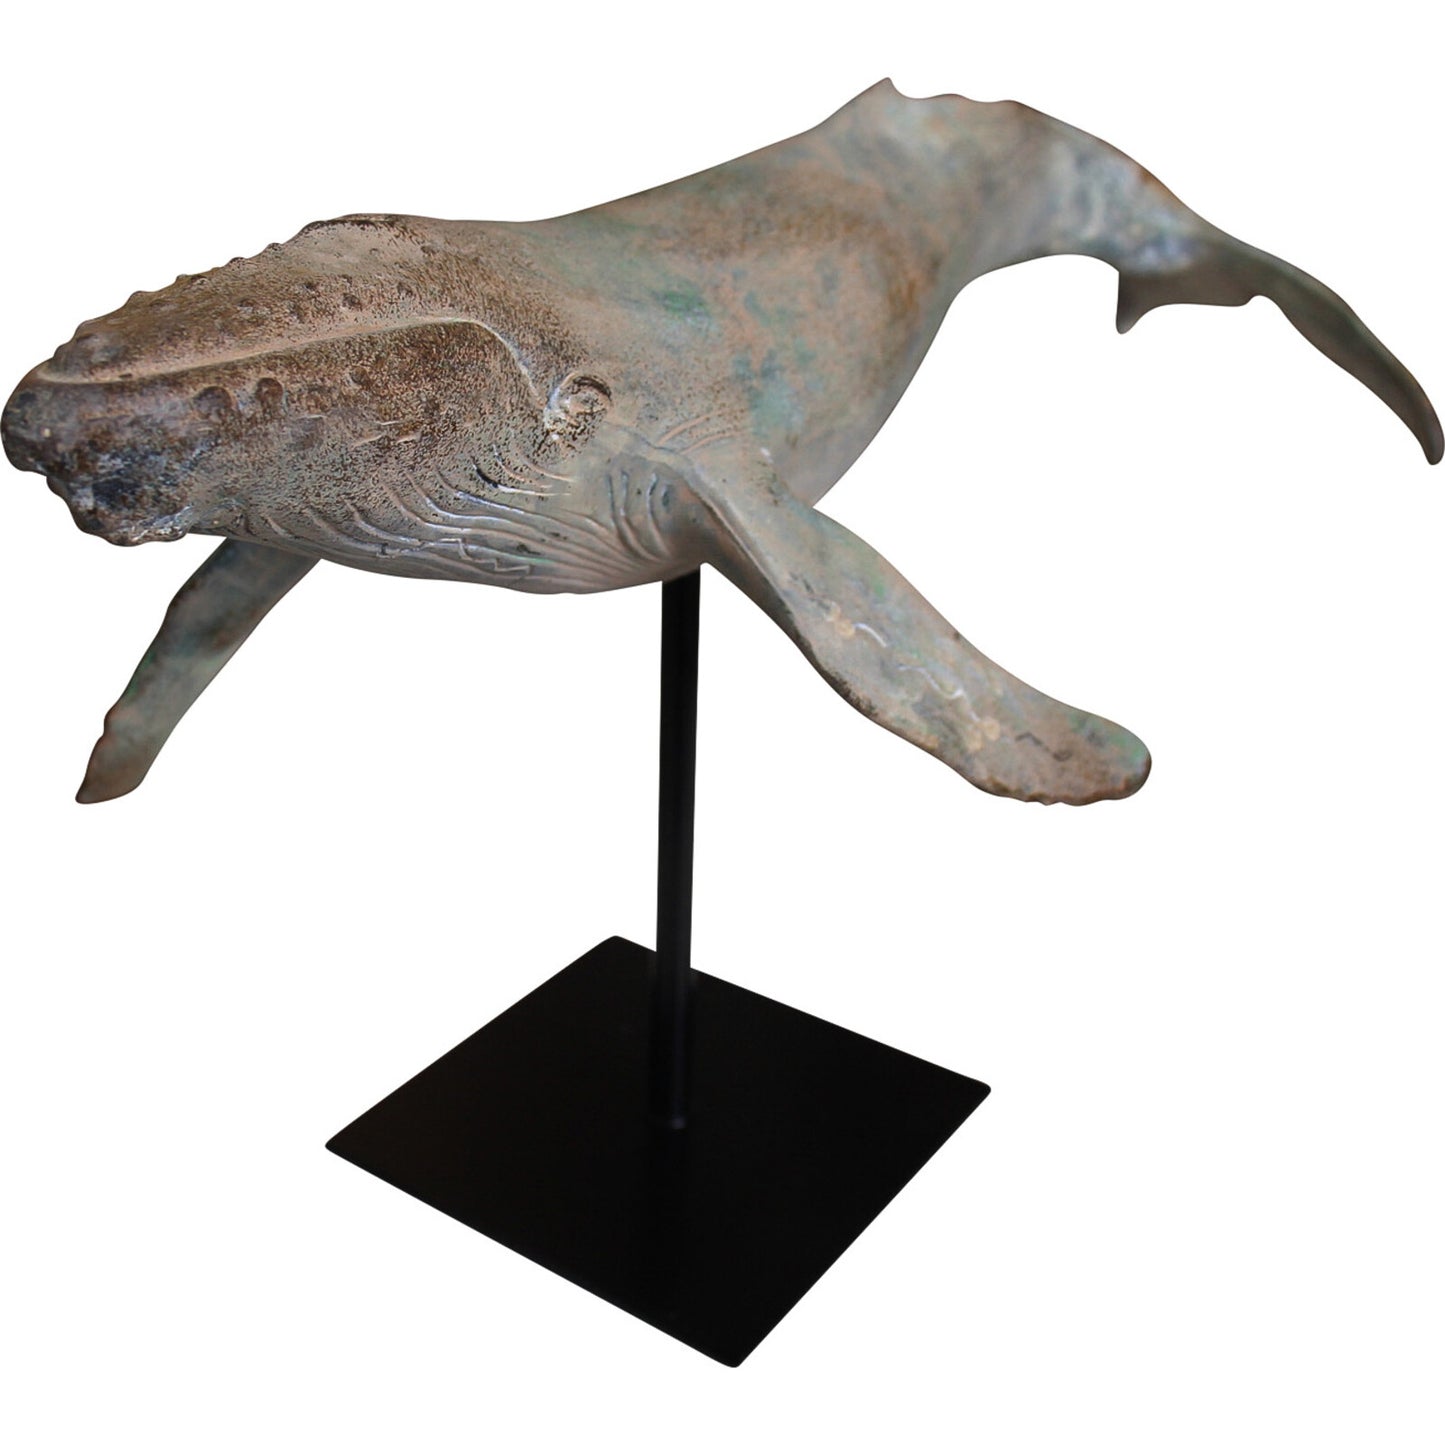 Humpback whale on stand - statue